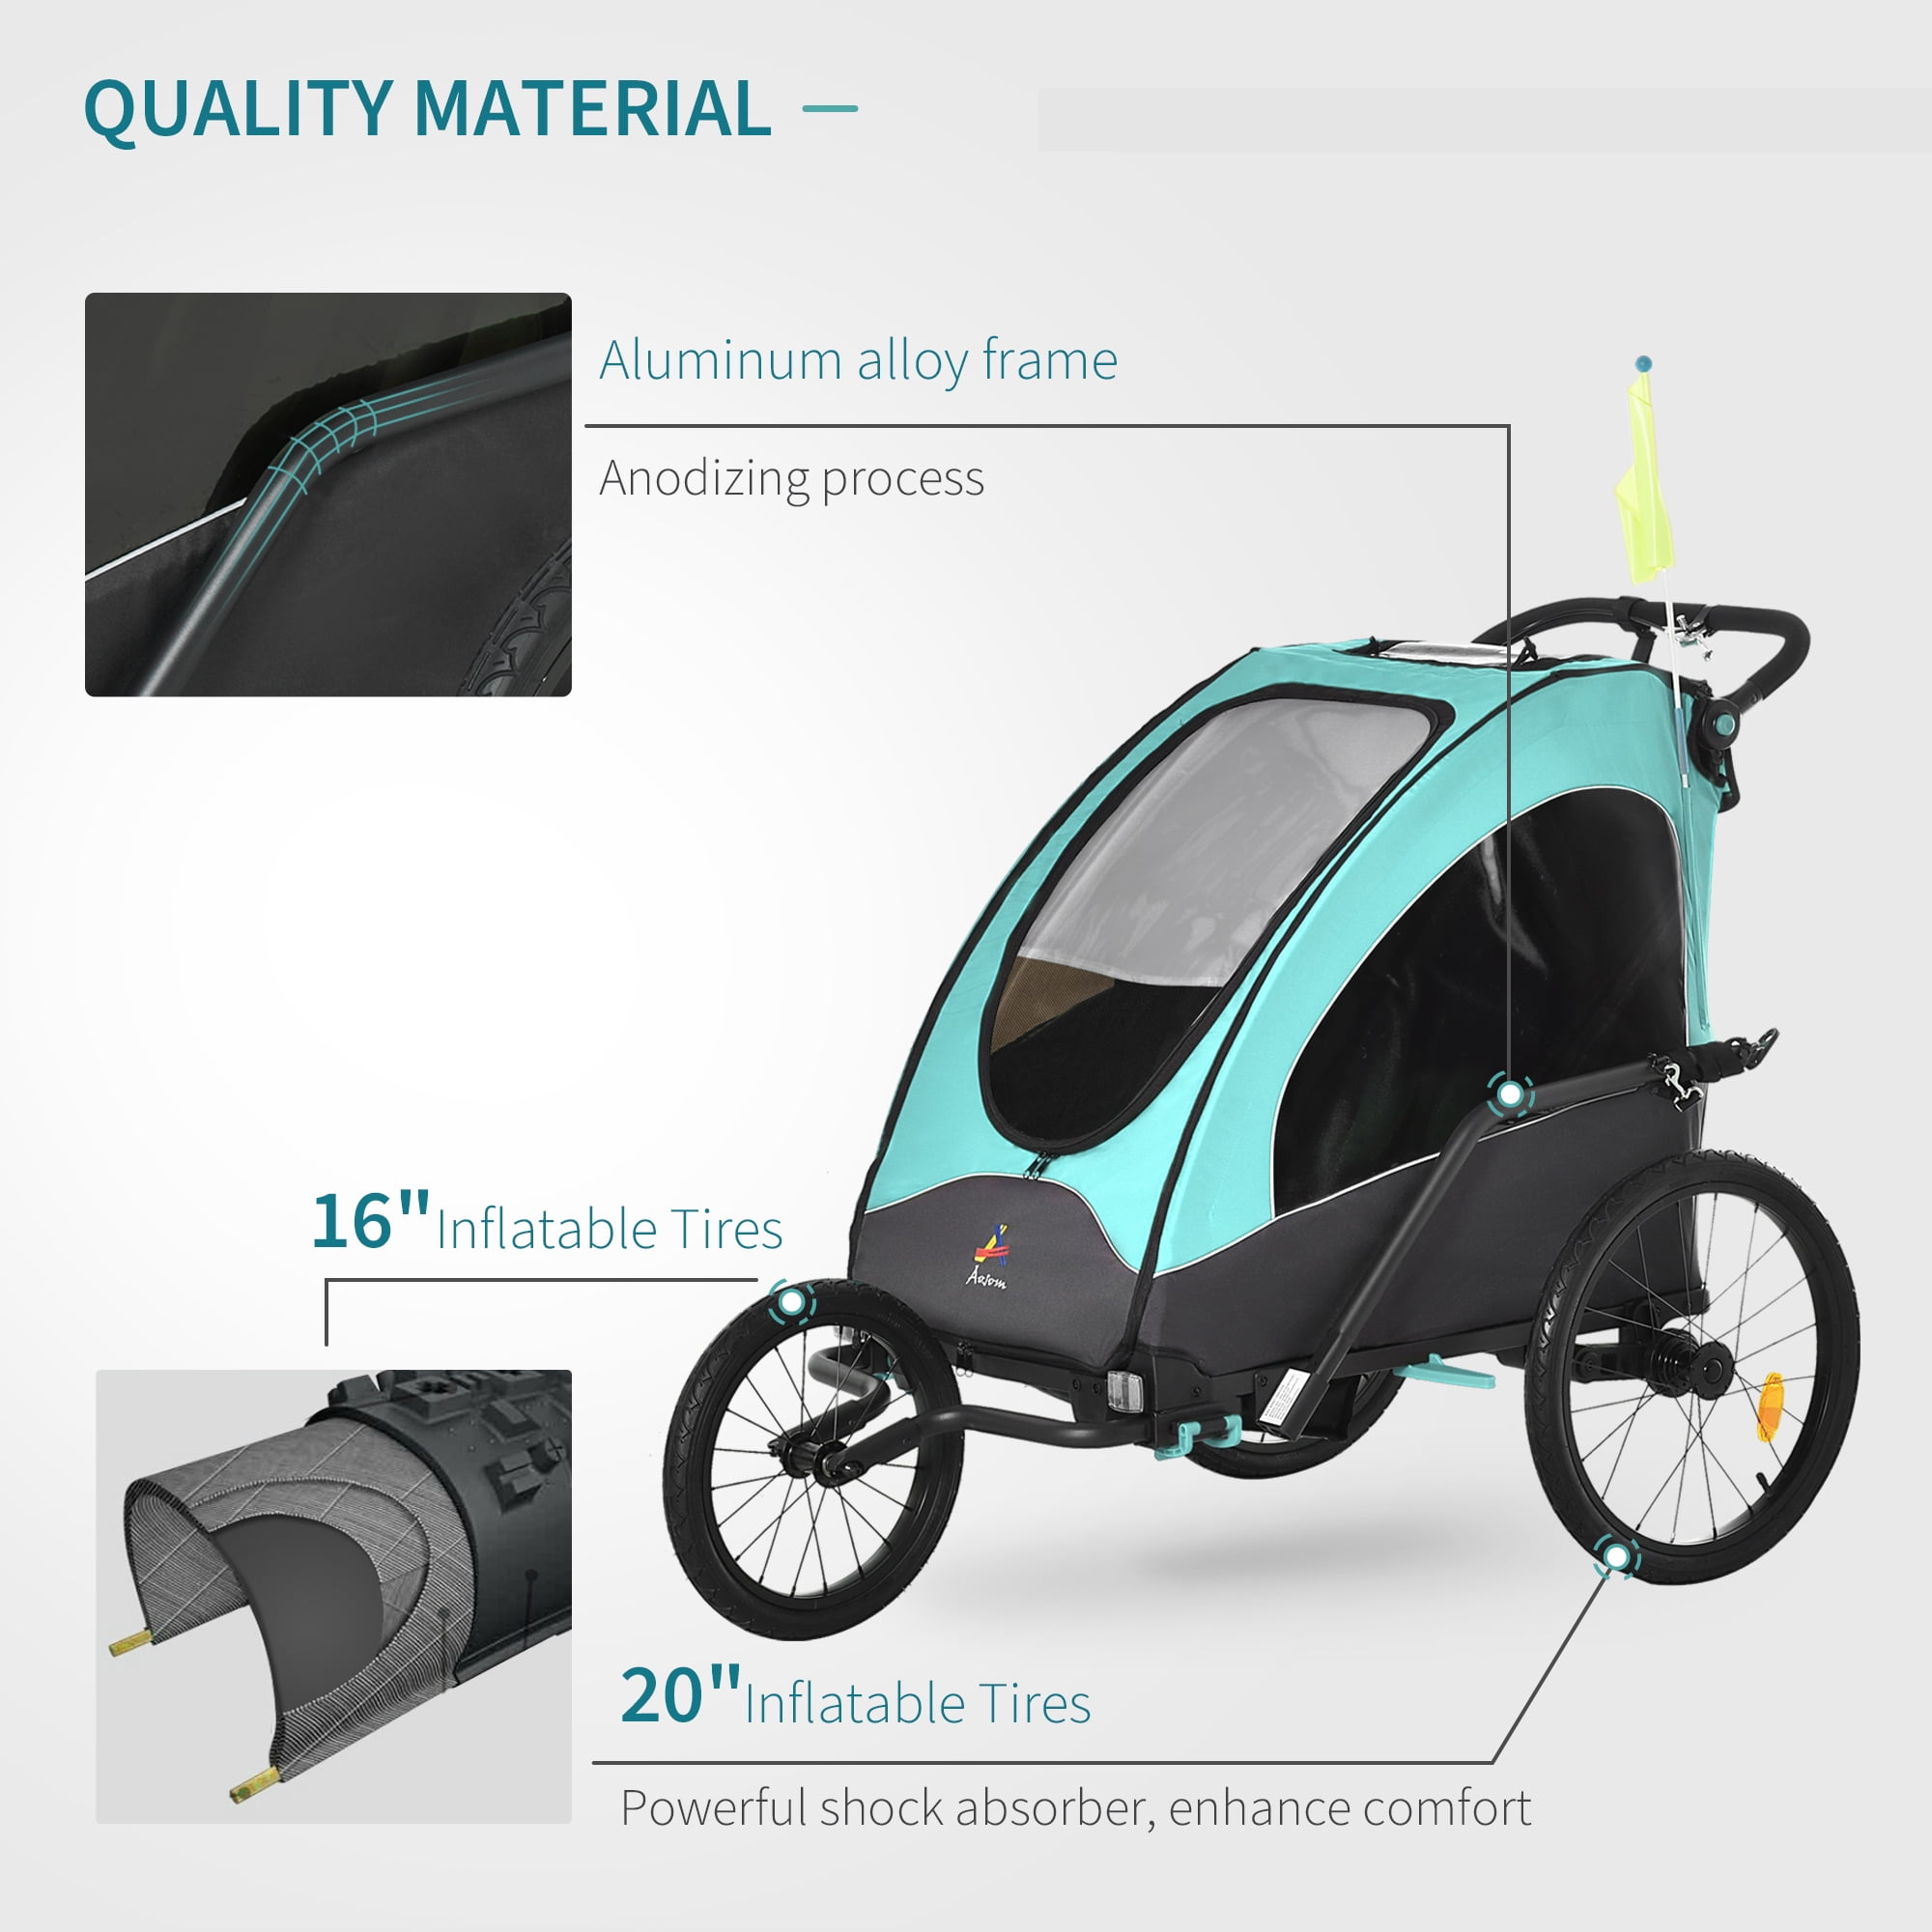 Foldable Bike Trailer NUEVEN 2-in-1 Double 2 Seat Bicycle Bike Trailer Jogger Strollerwith Handle Bar and Wheels Bike Hitch Safety Flag 20 Inch Wheel Size 